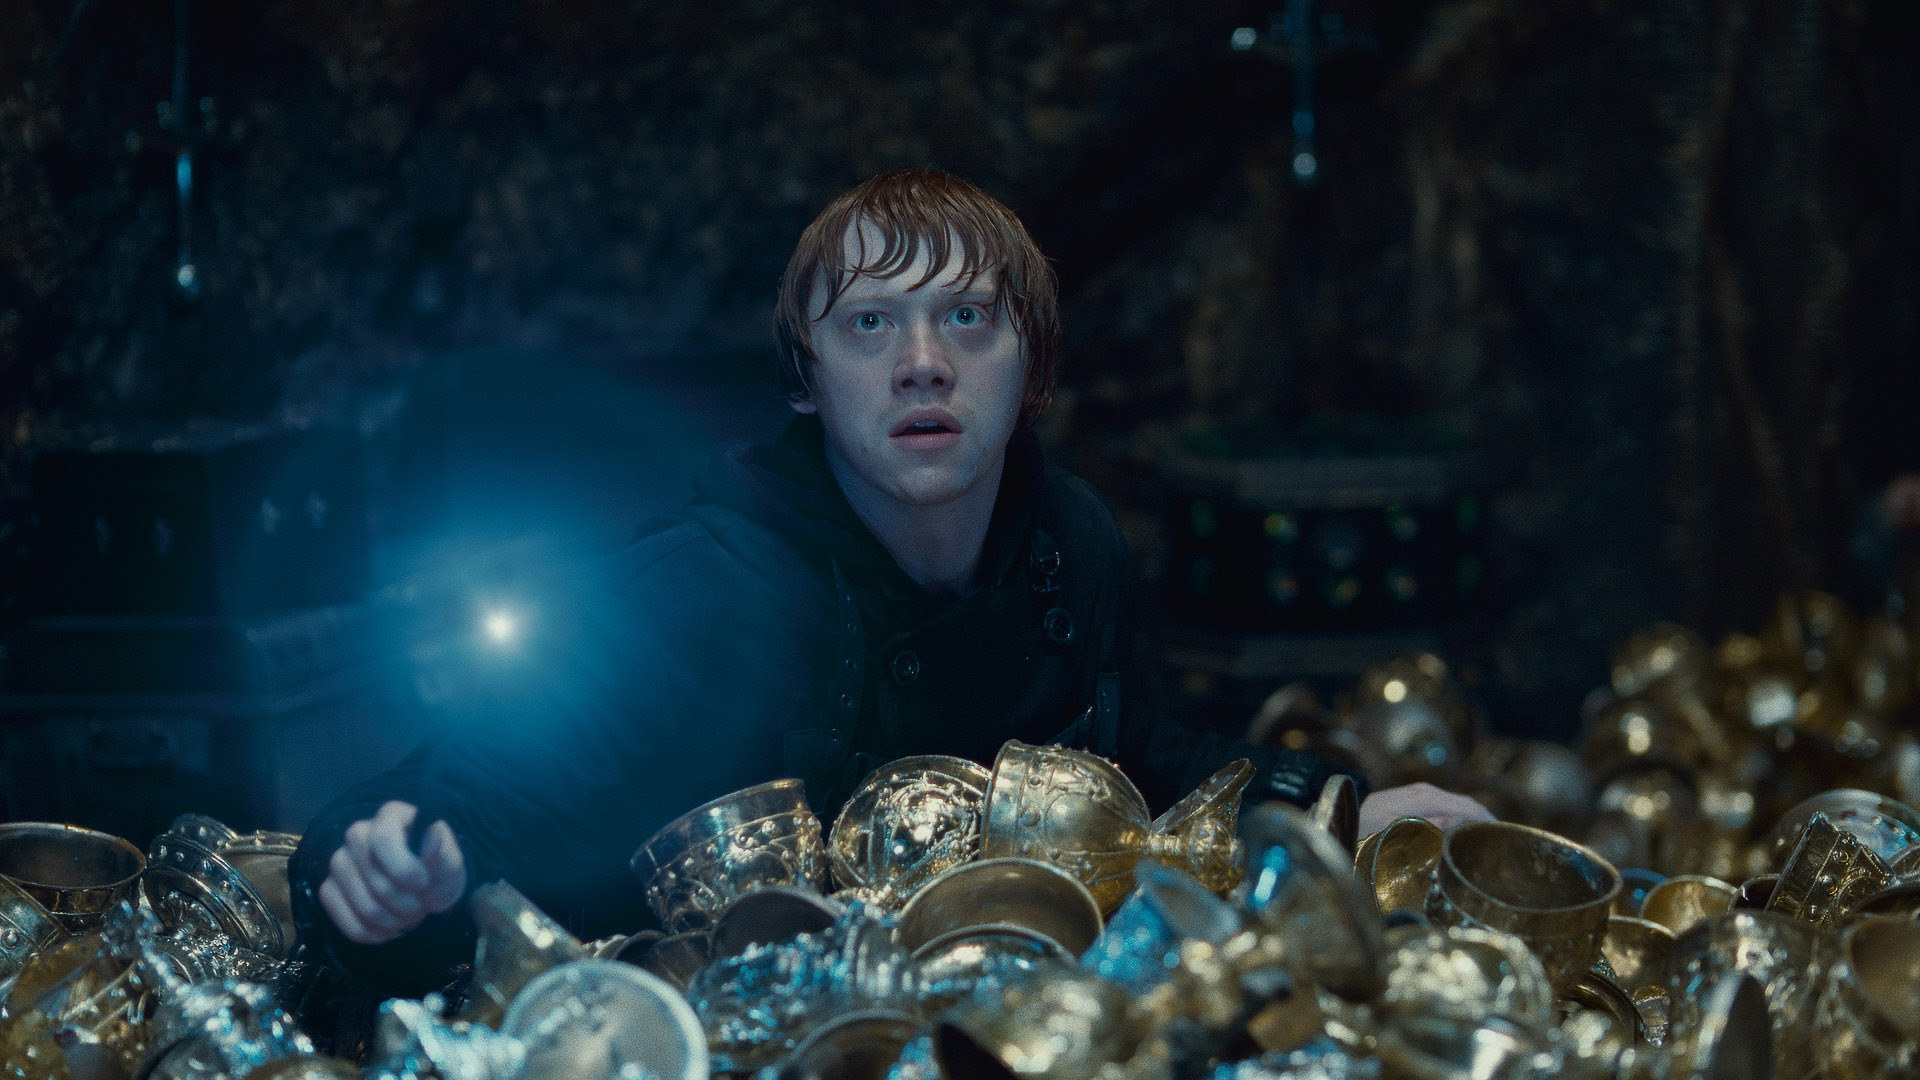 Ron in a vault full of valuables holding his wand